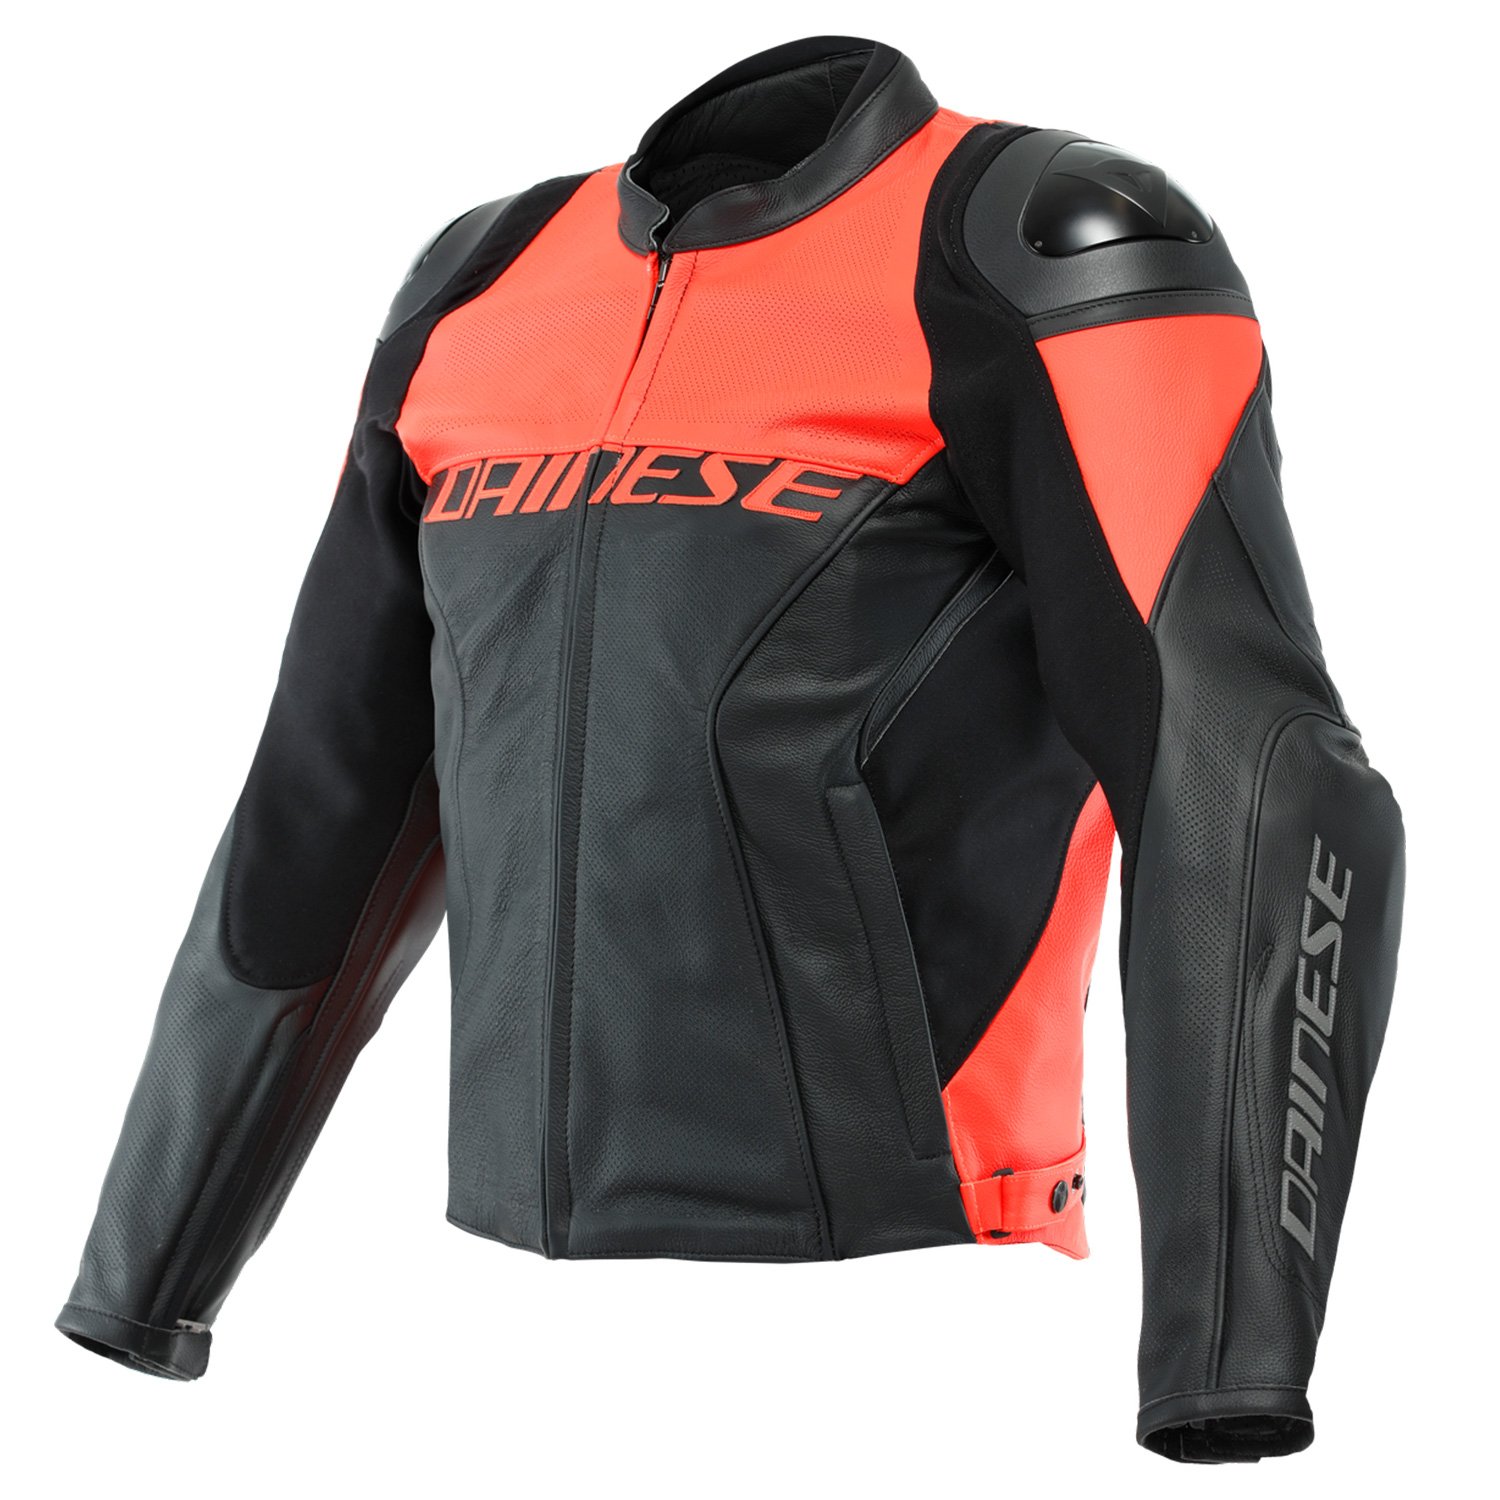 Image of Dainese Racing 4 Perforated Leather Jacket Black Fluo Red Size 46 ID 8051019302915